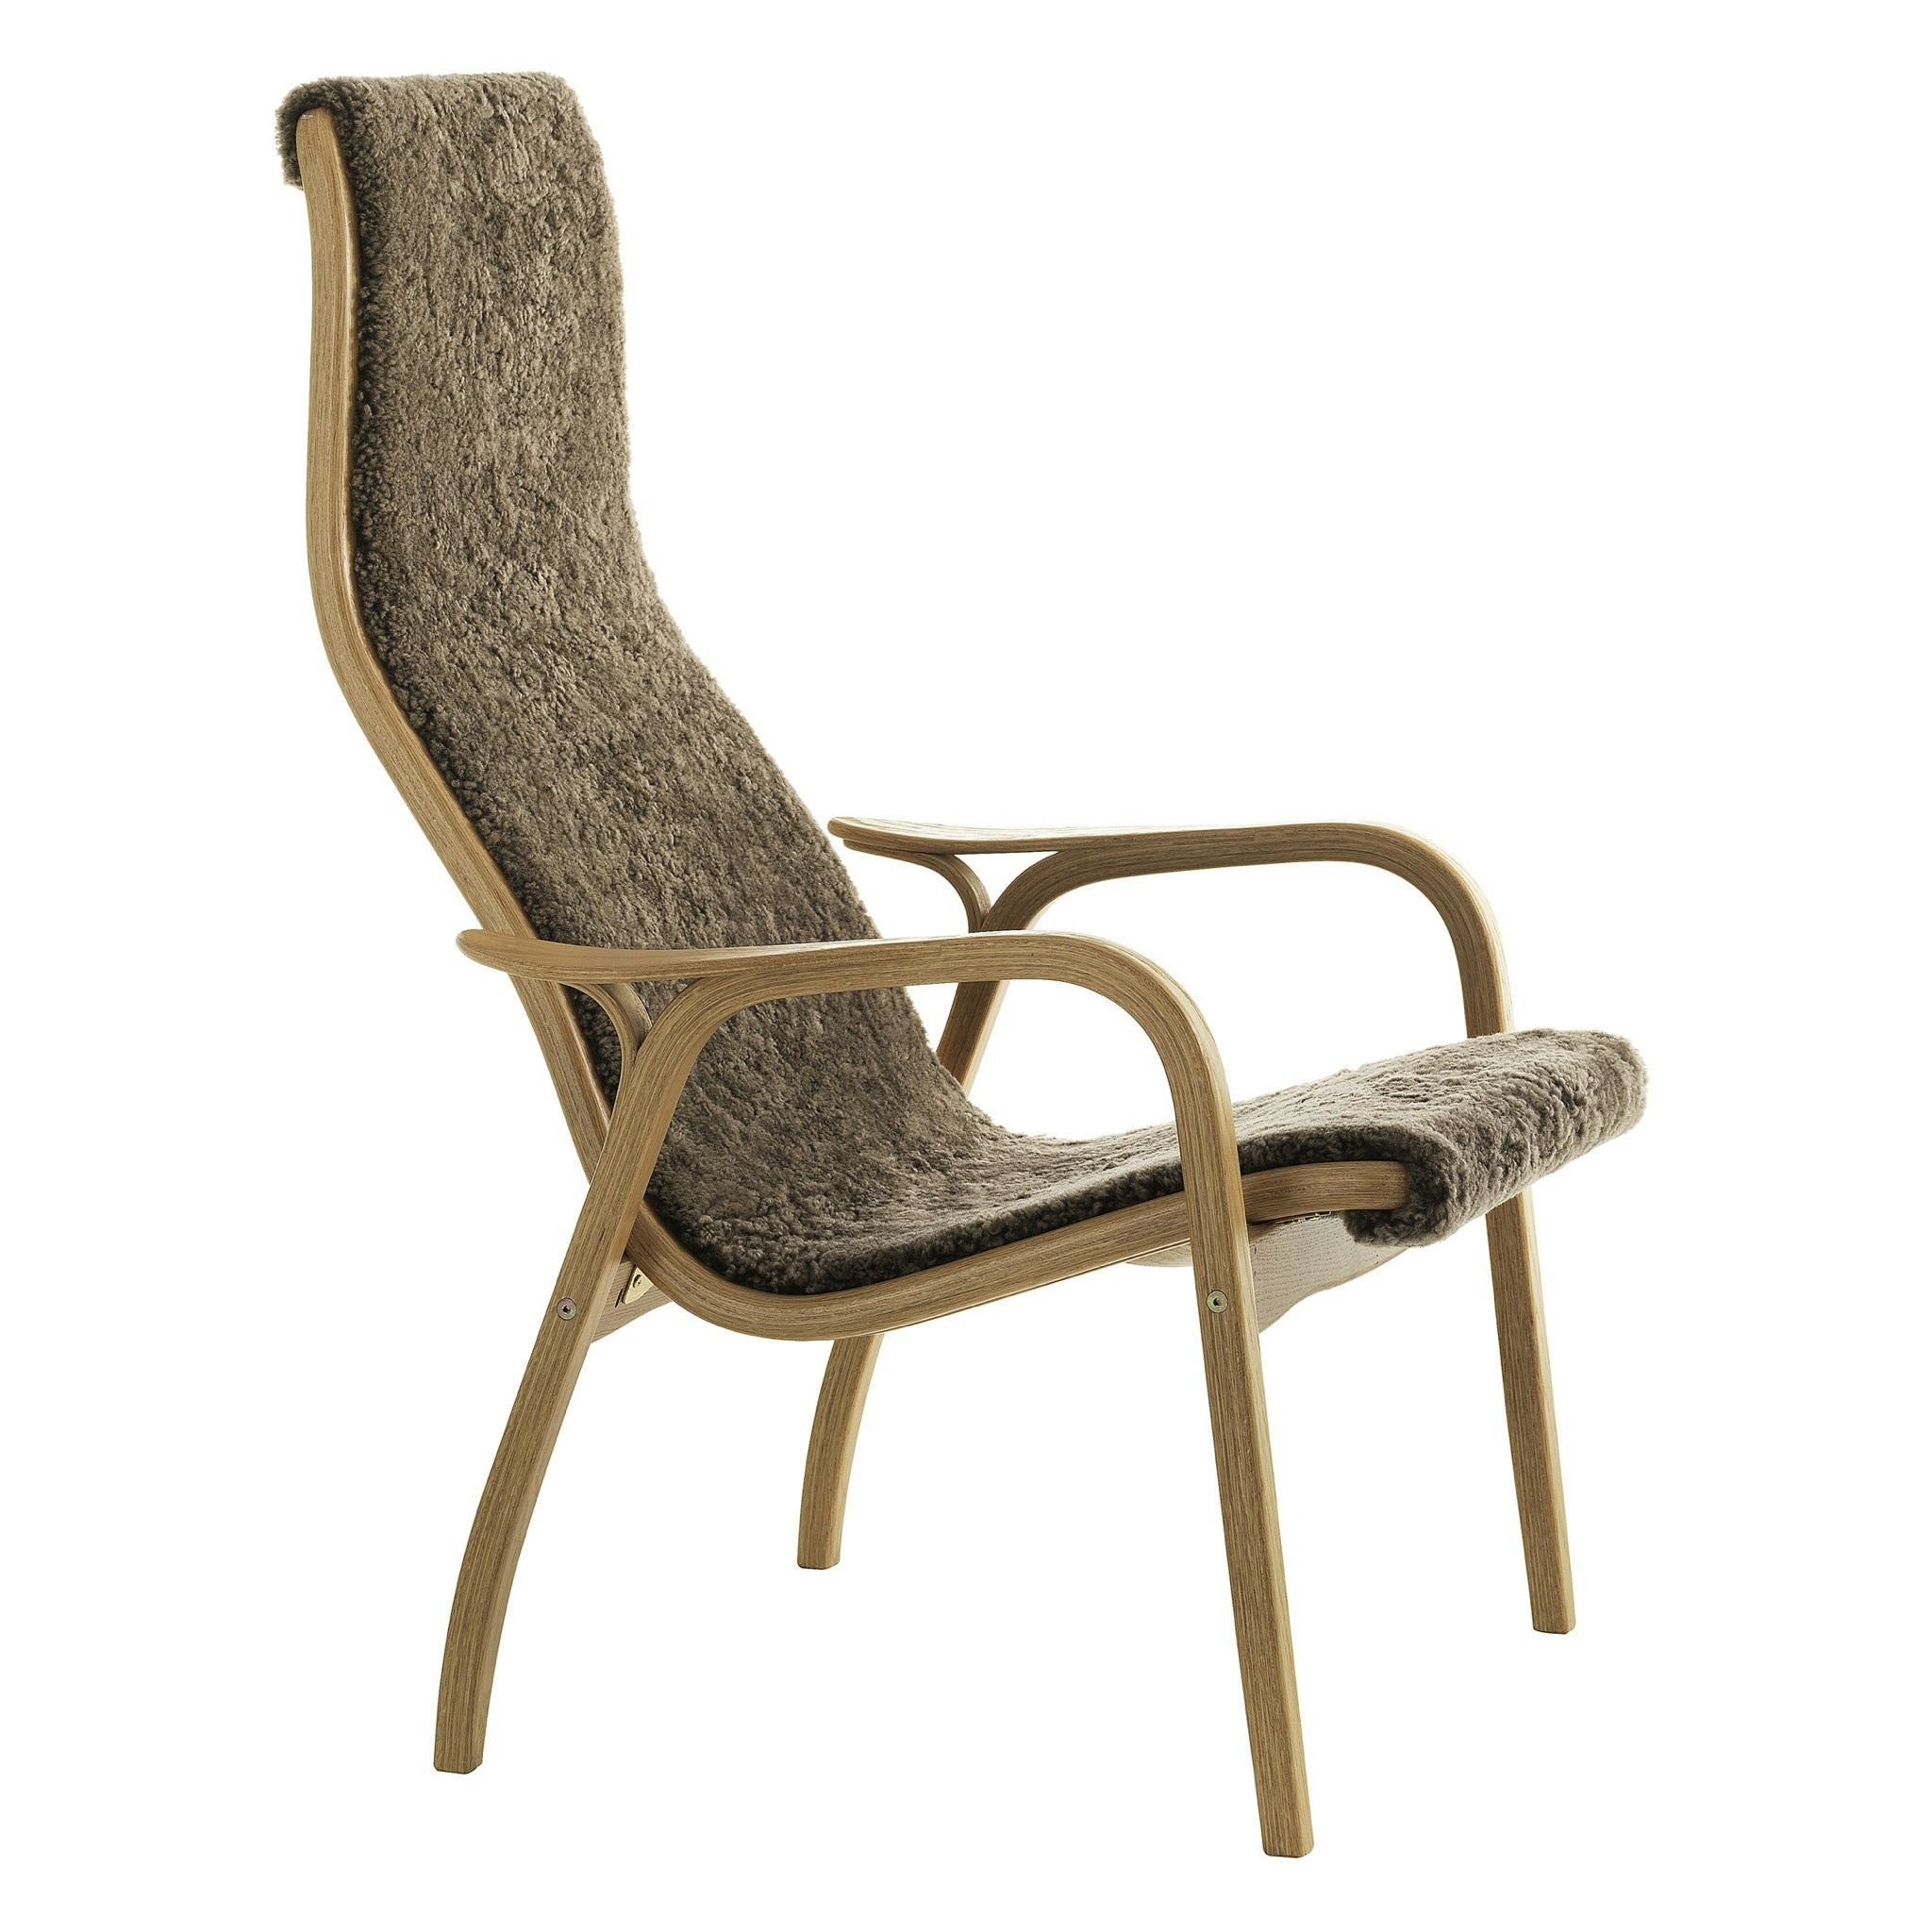 Lamino Lounger by Swedese